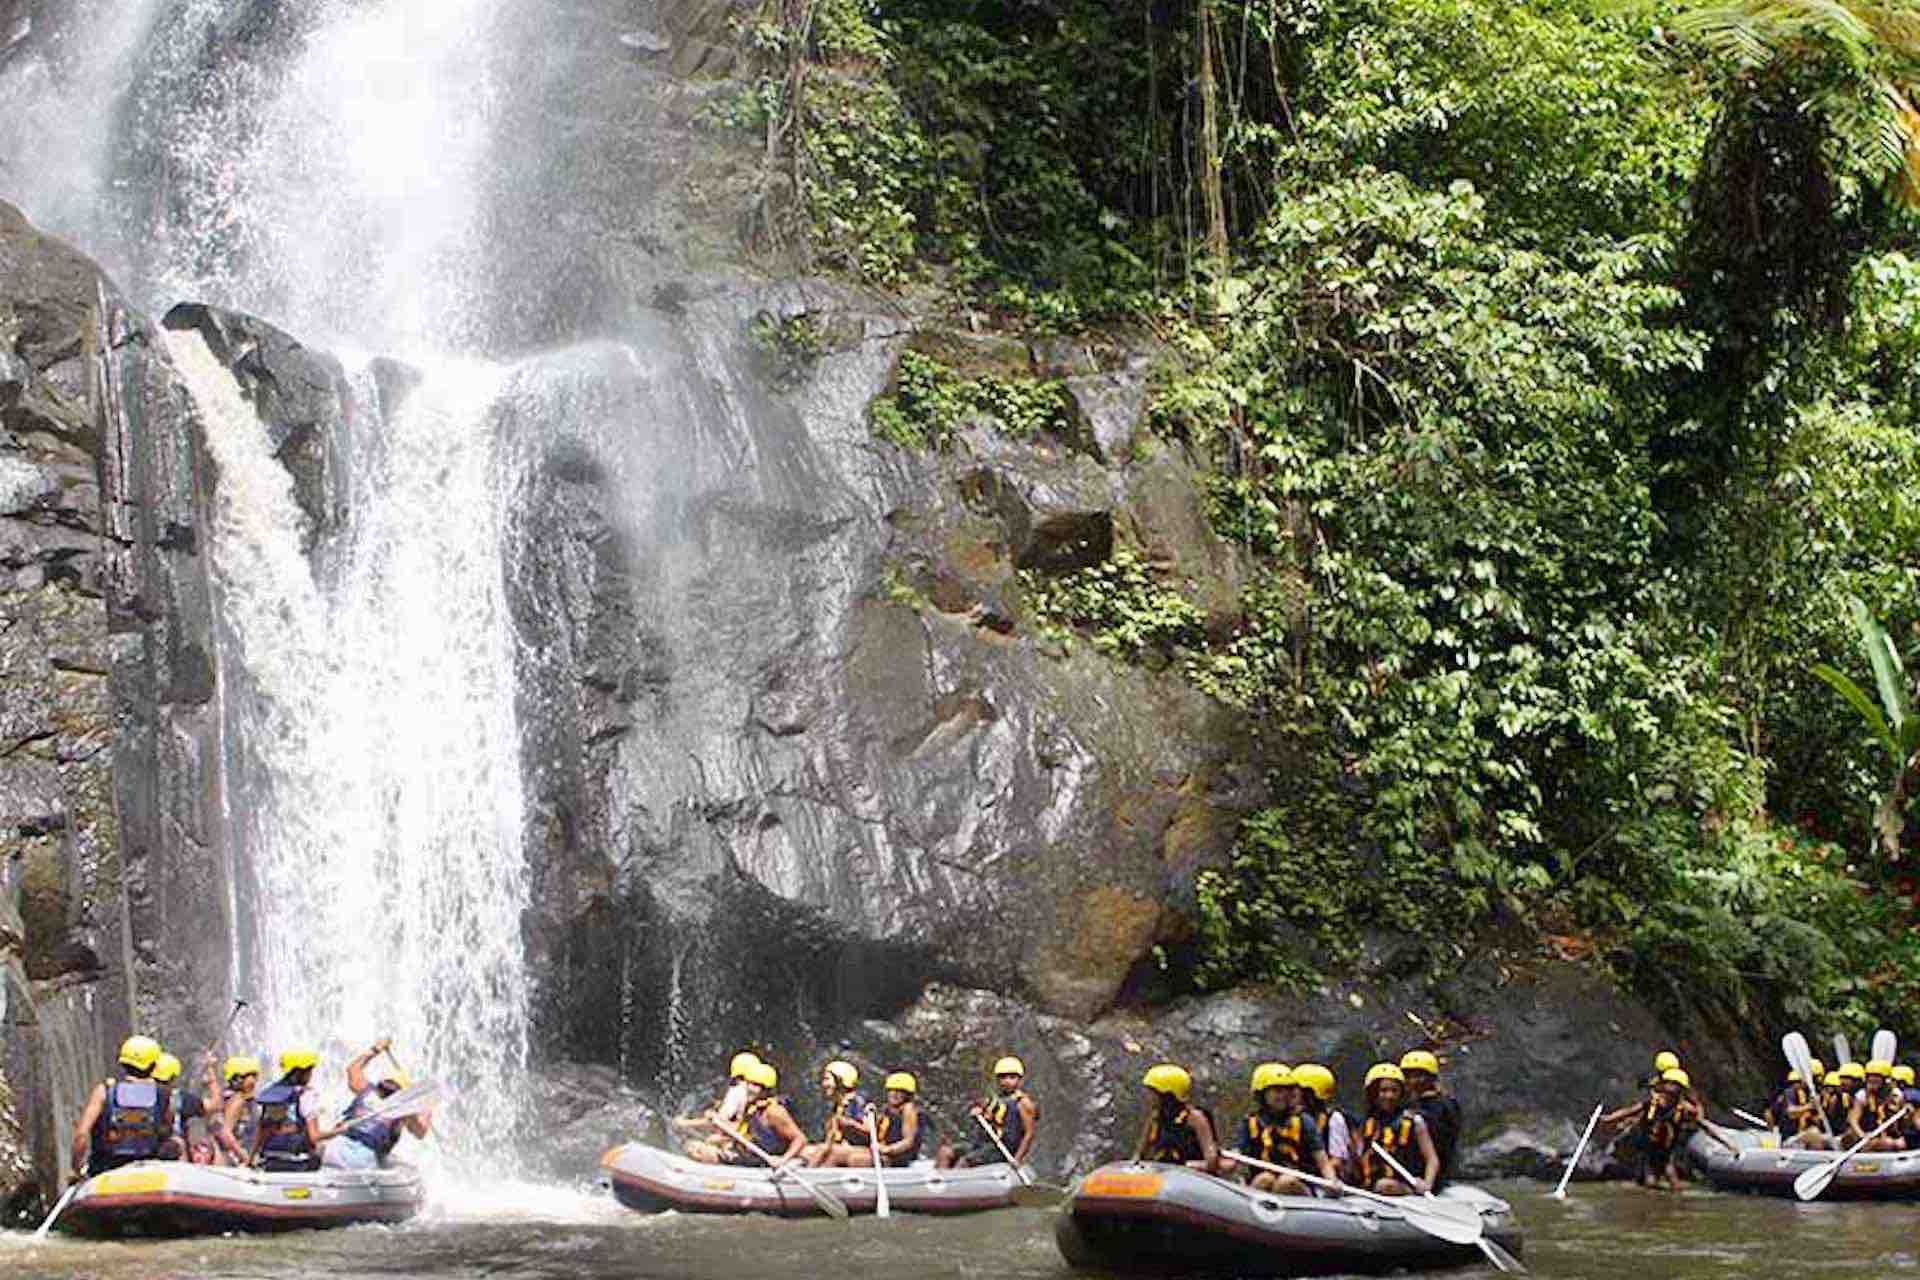 Bali River Rafting Ubud tour in Ayung river guests under waterfall